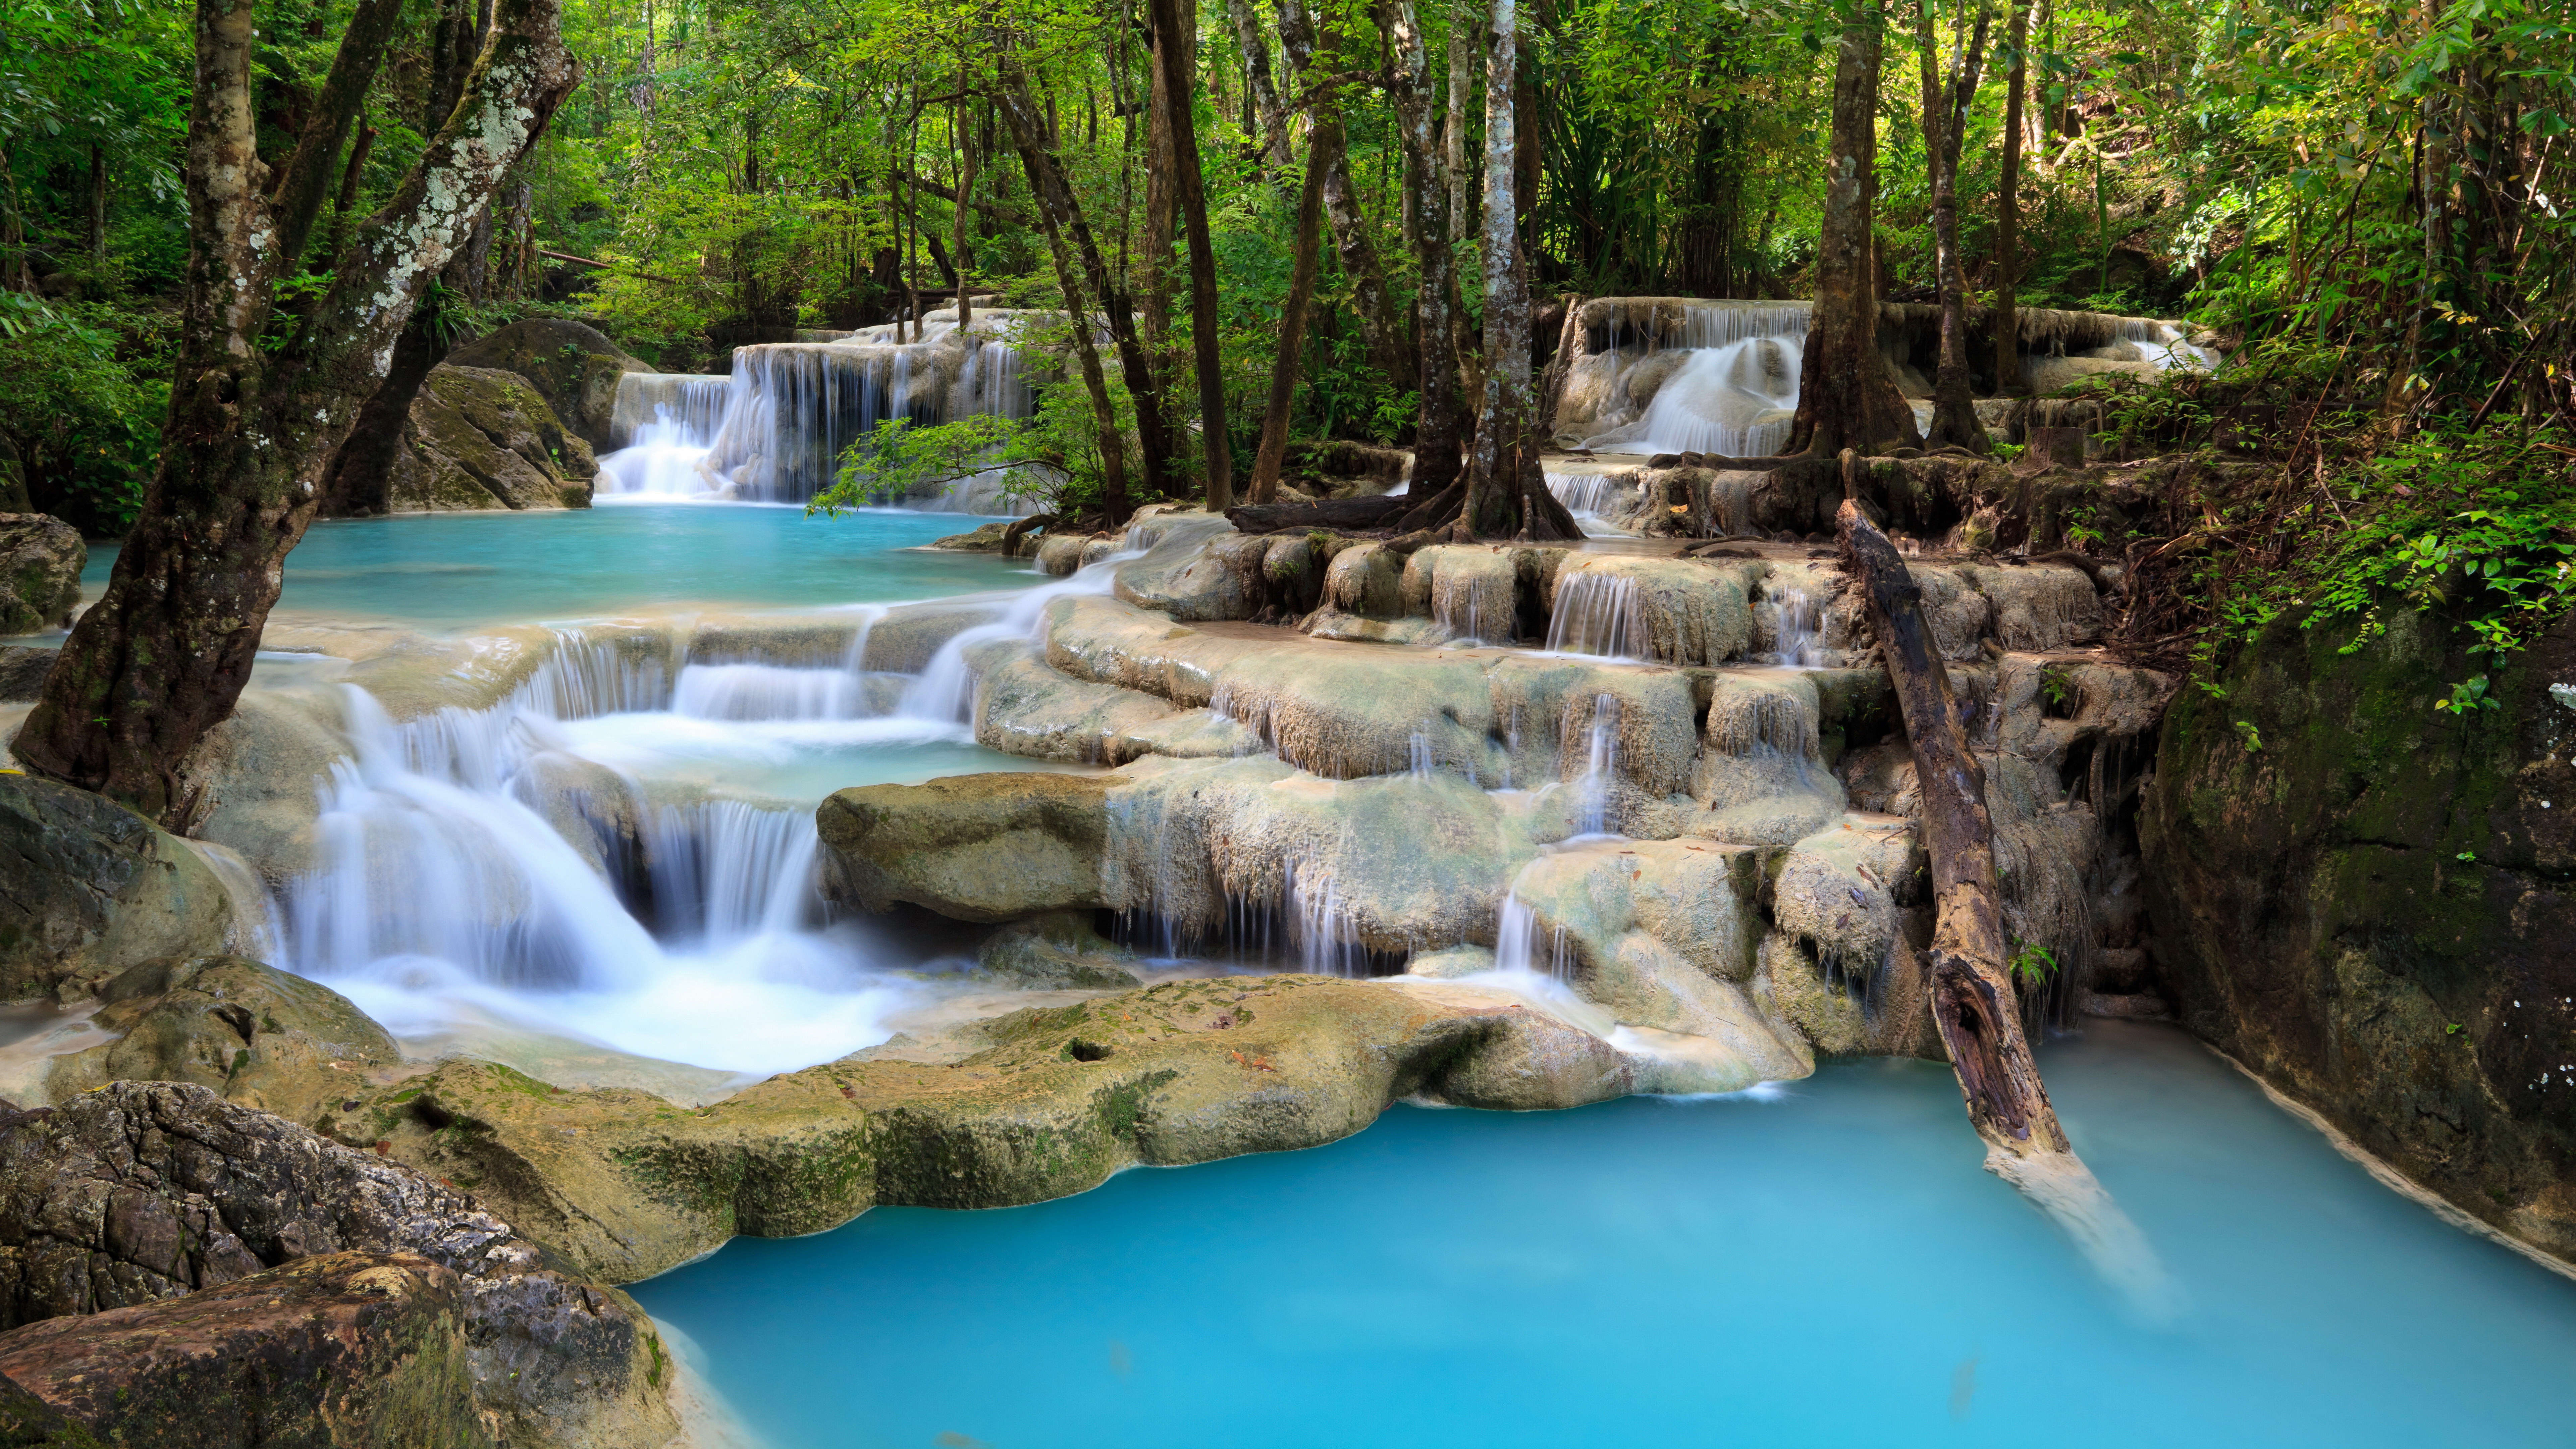 General 7680x4320 nature waterfall forest lake stones Thailand trees